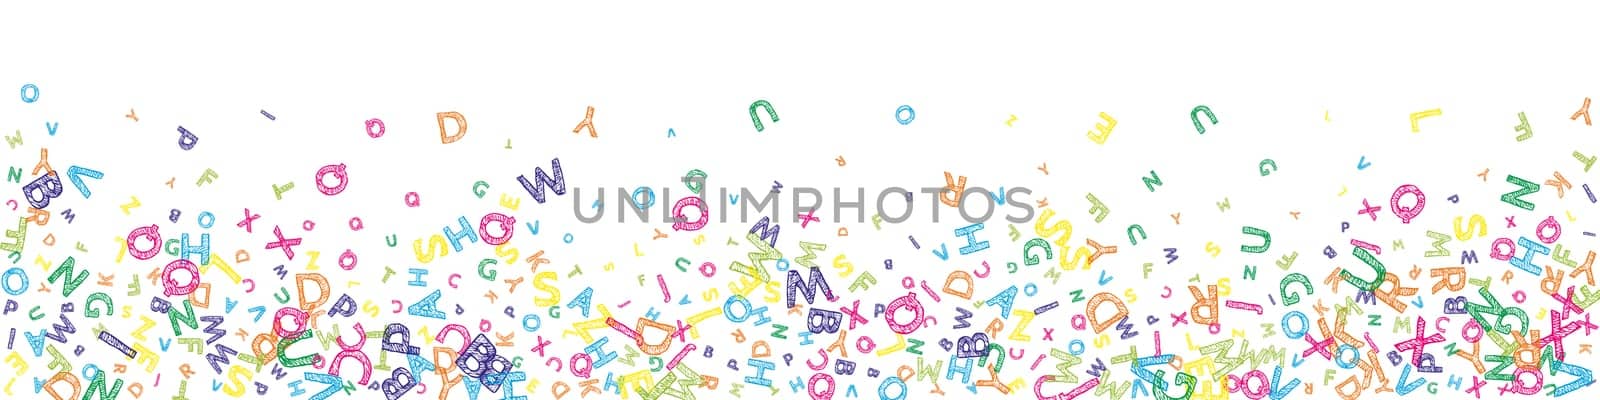 Falling letters of English language. Colorful messy sketch flying words of Latin alphabet. Foreign languages study concept. Exotic back to school banner on white background. by beginagain